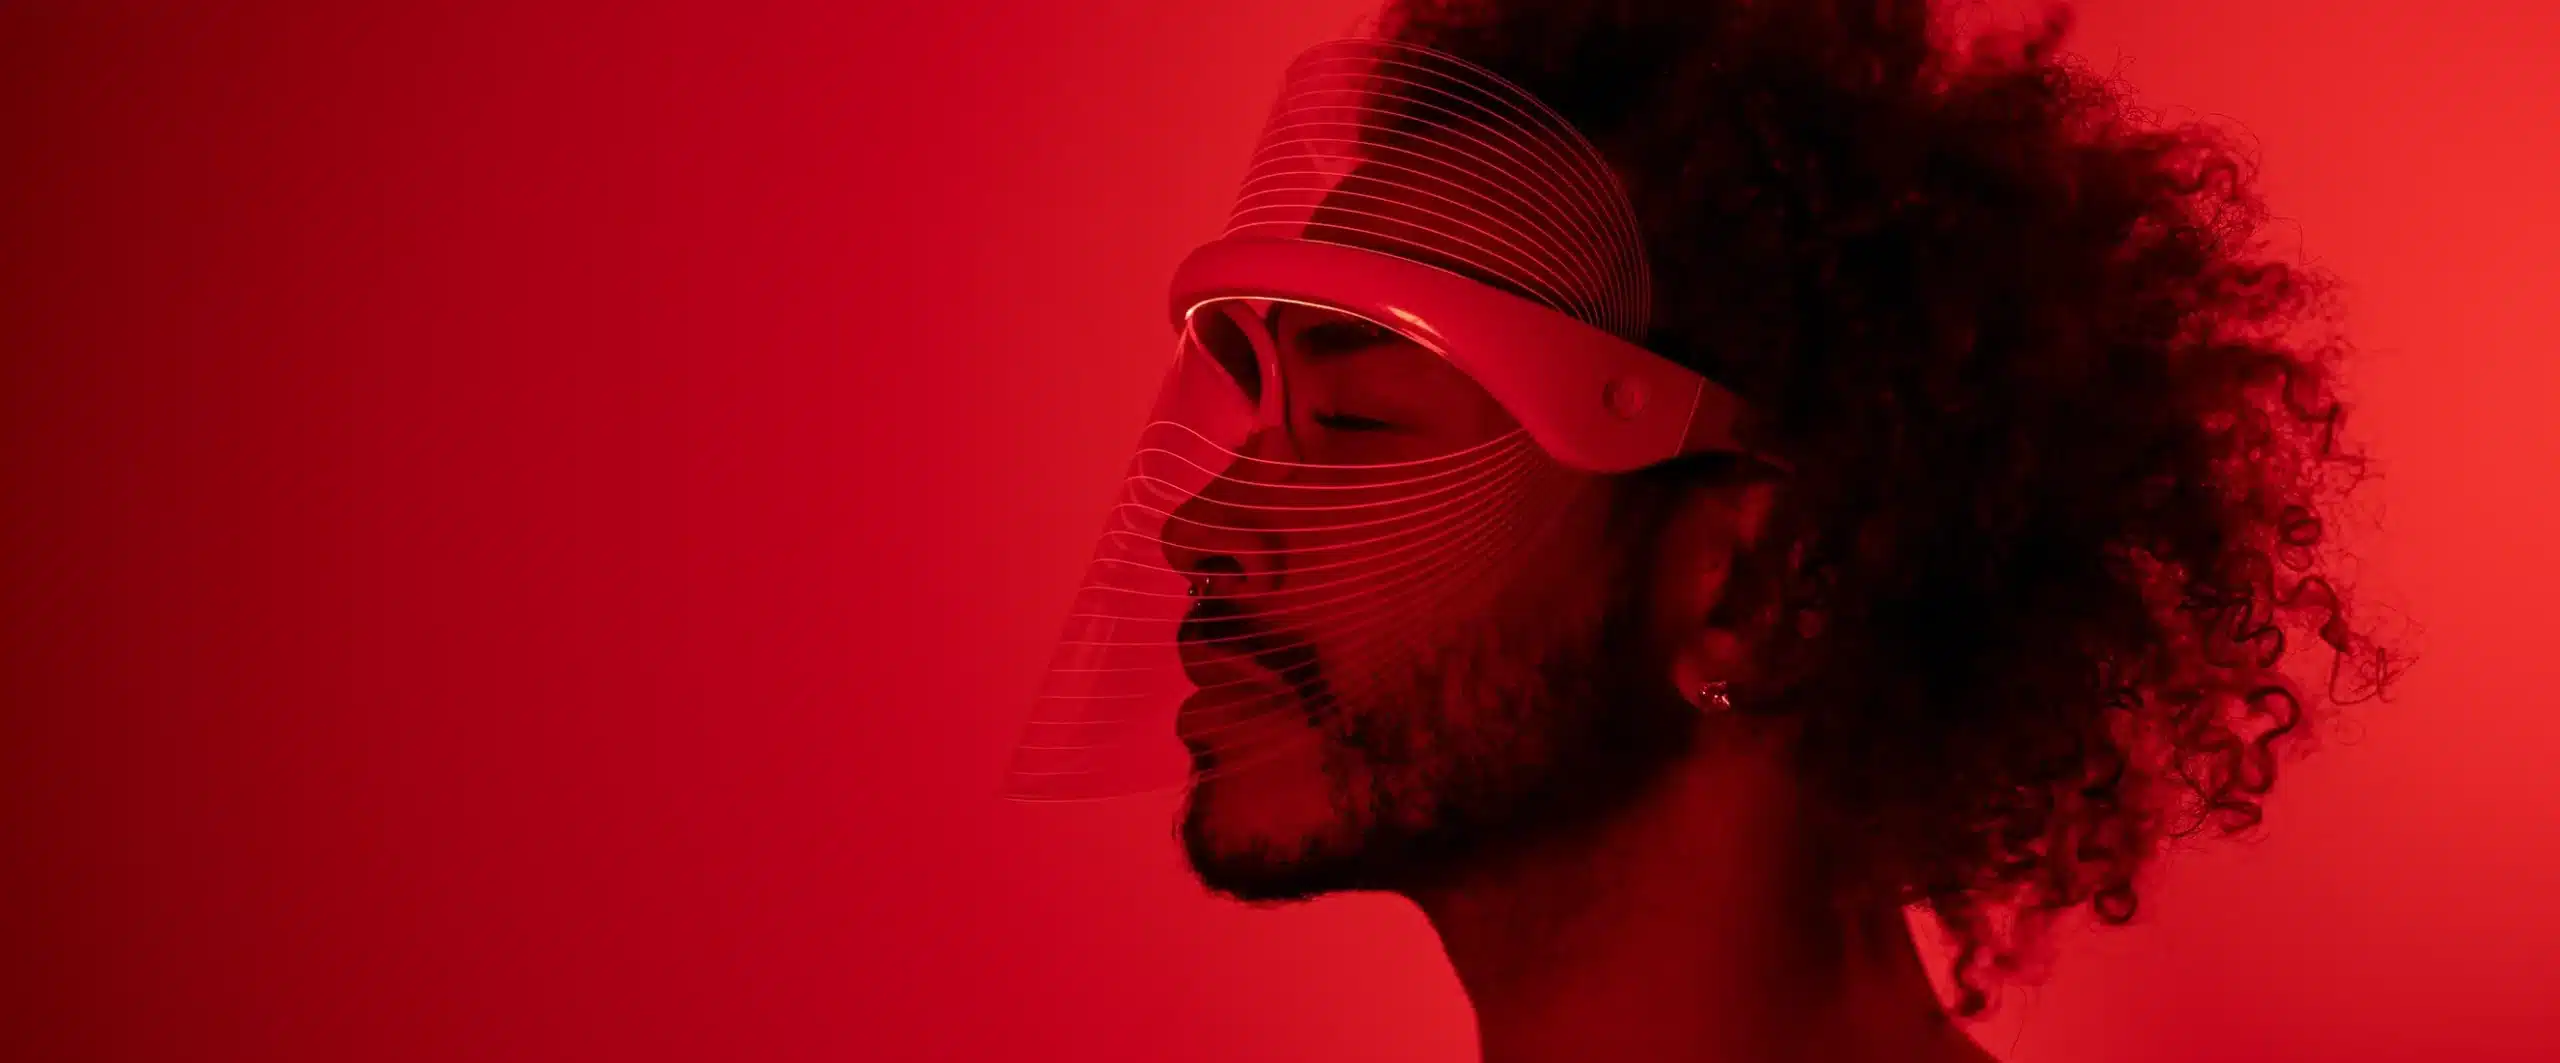 A side profile of a man wearing a red light therapy mask